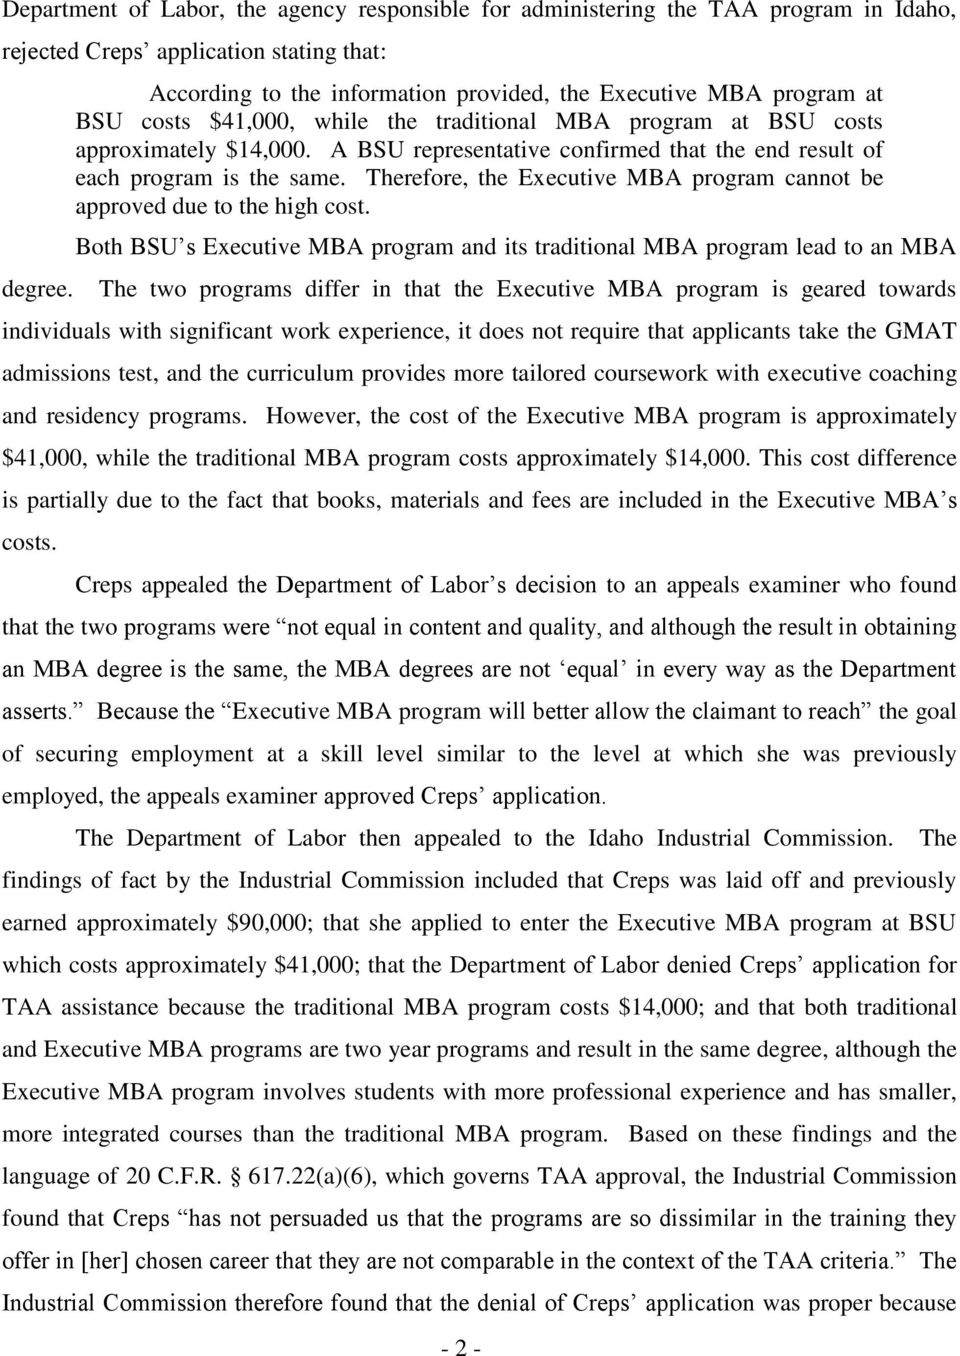 A BSU representative confirmed that the end result of each program is the same. Therefore, the Executive MBA program cannot be approved due to the high cost.